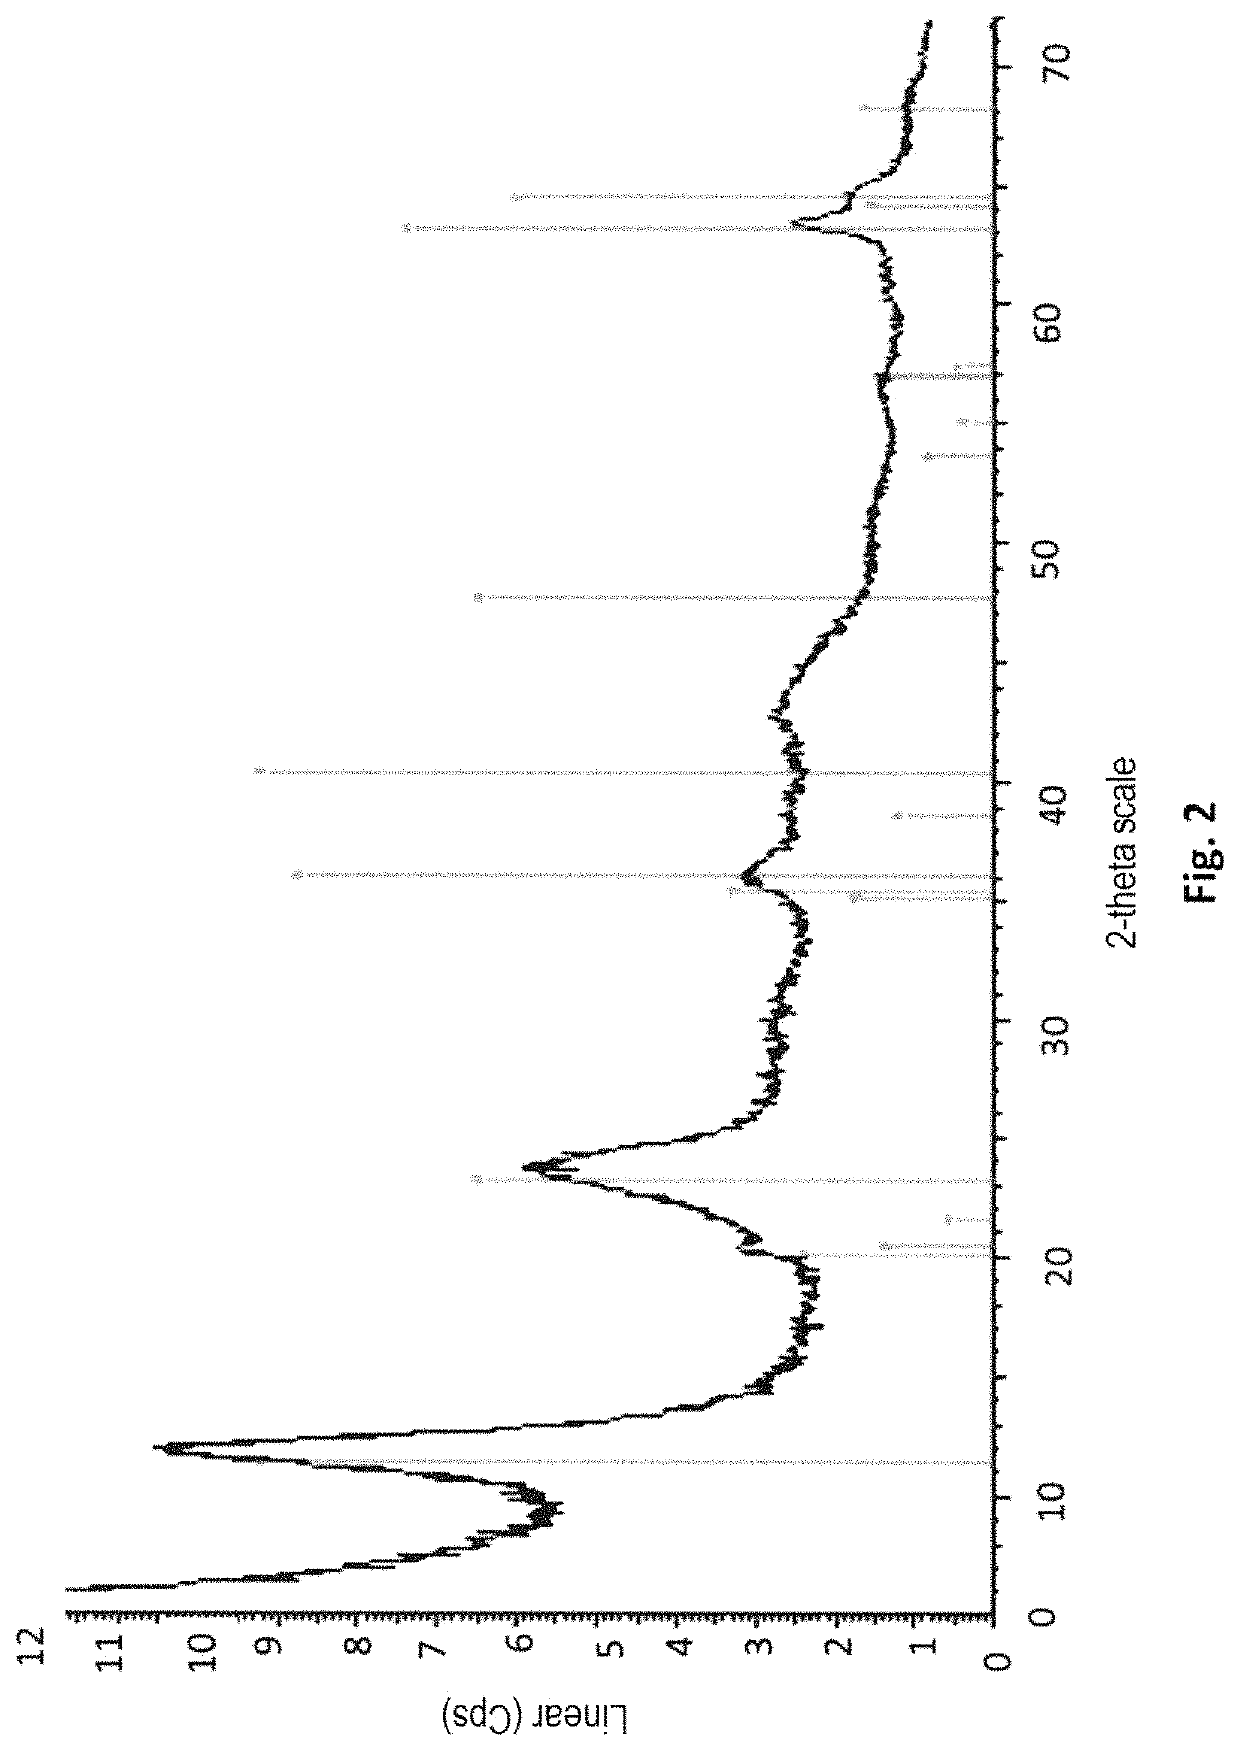 Process for preparing an adsorbing material comprising a precipitating step of boehmite according to specific conditions and process for extracting lithium from saline solutions using this material